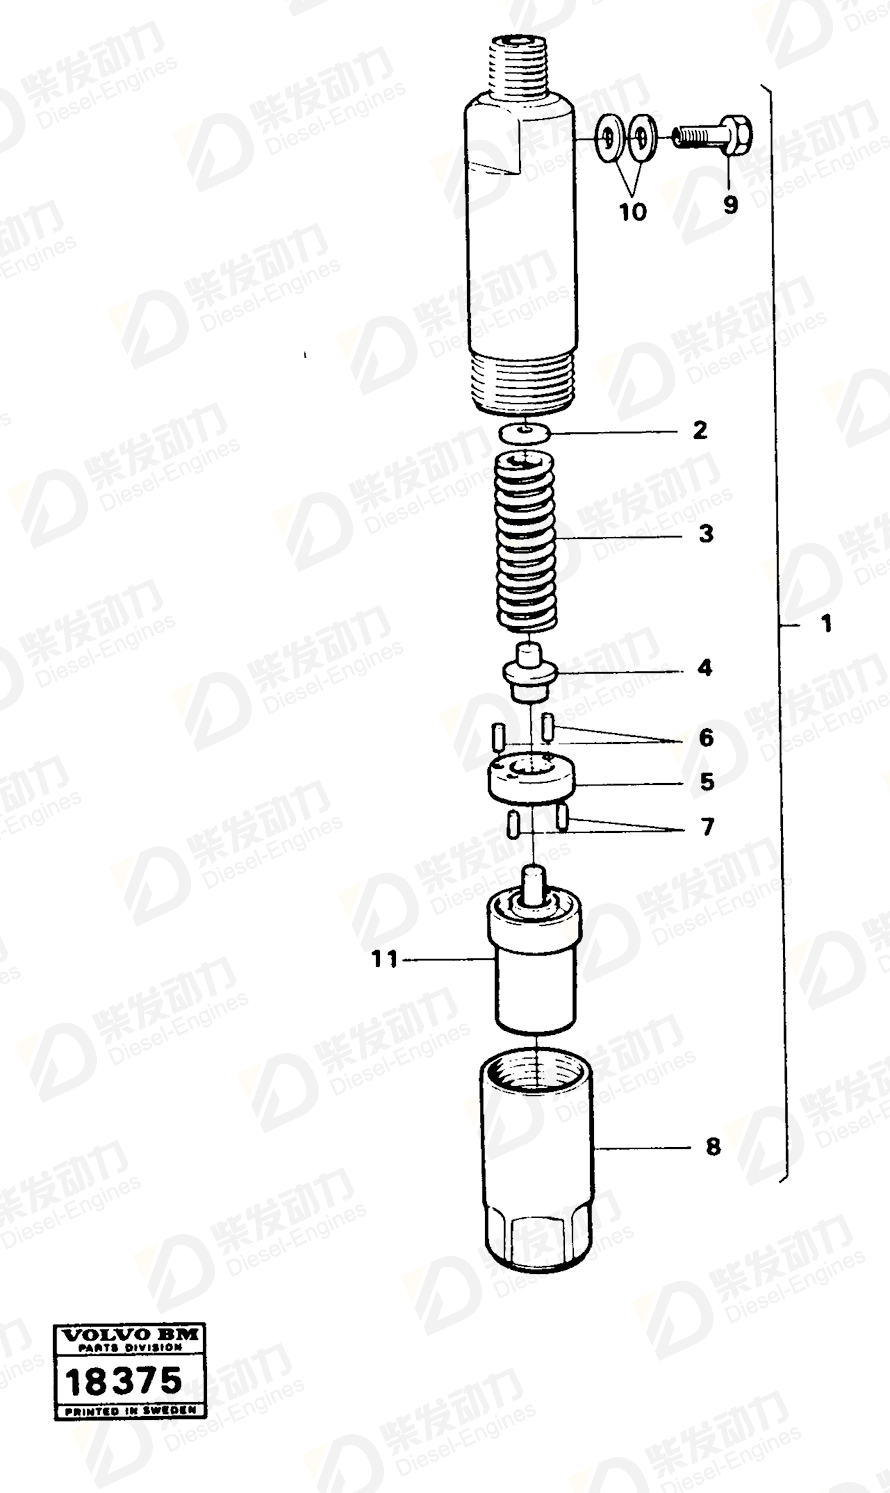 VOLVO Washer 1698513 Drawing